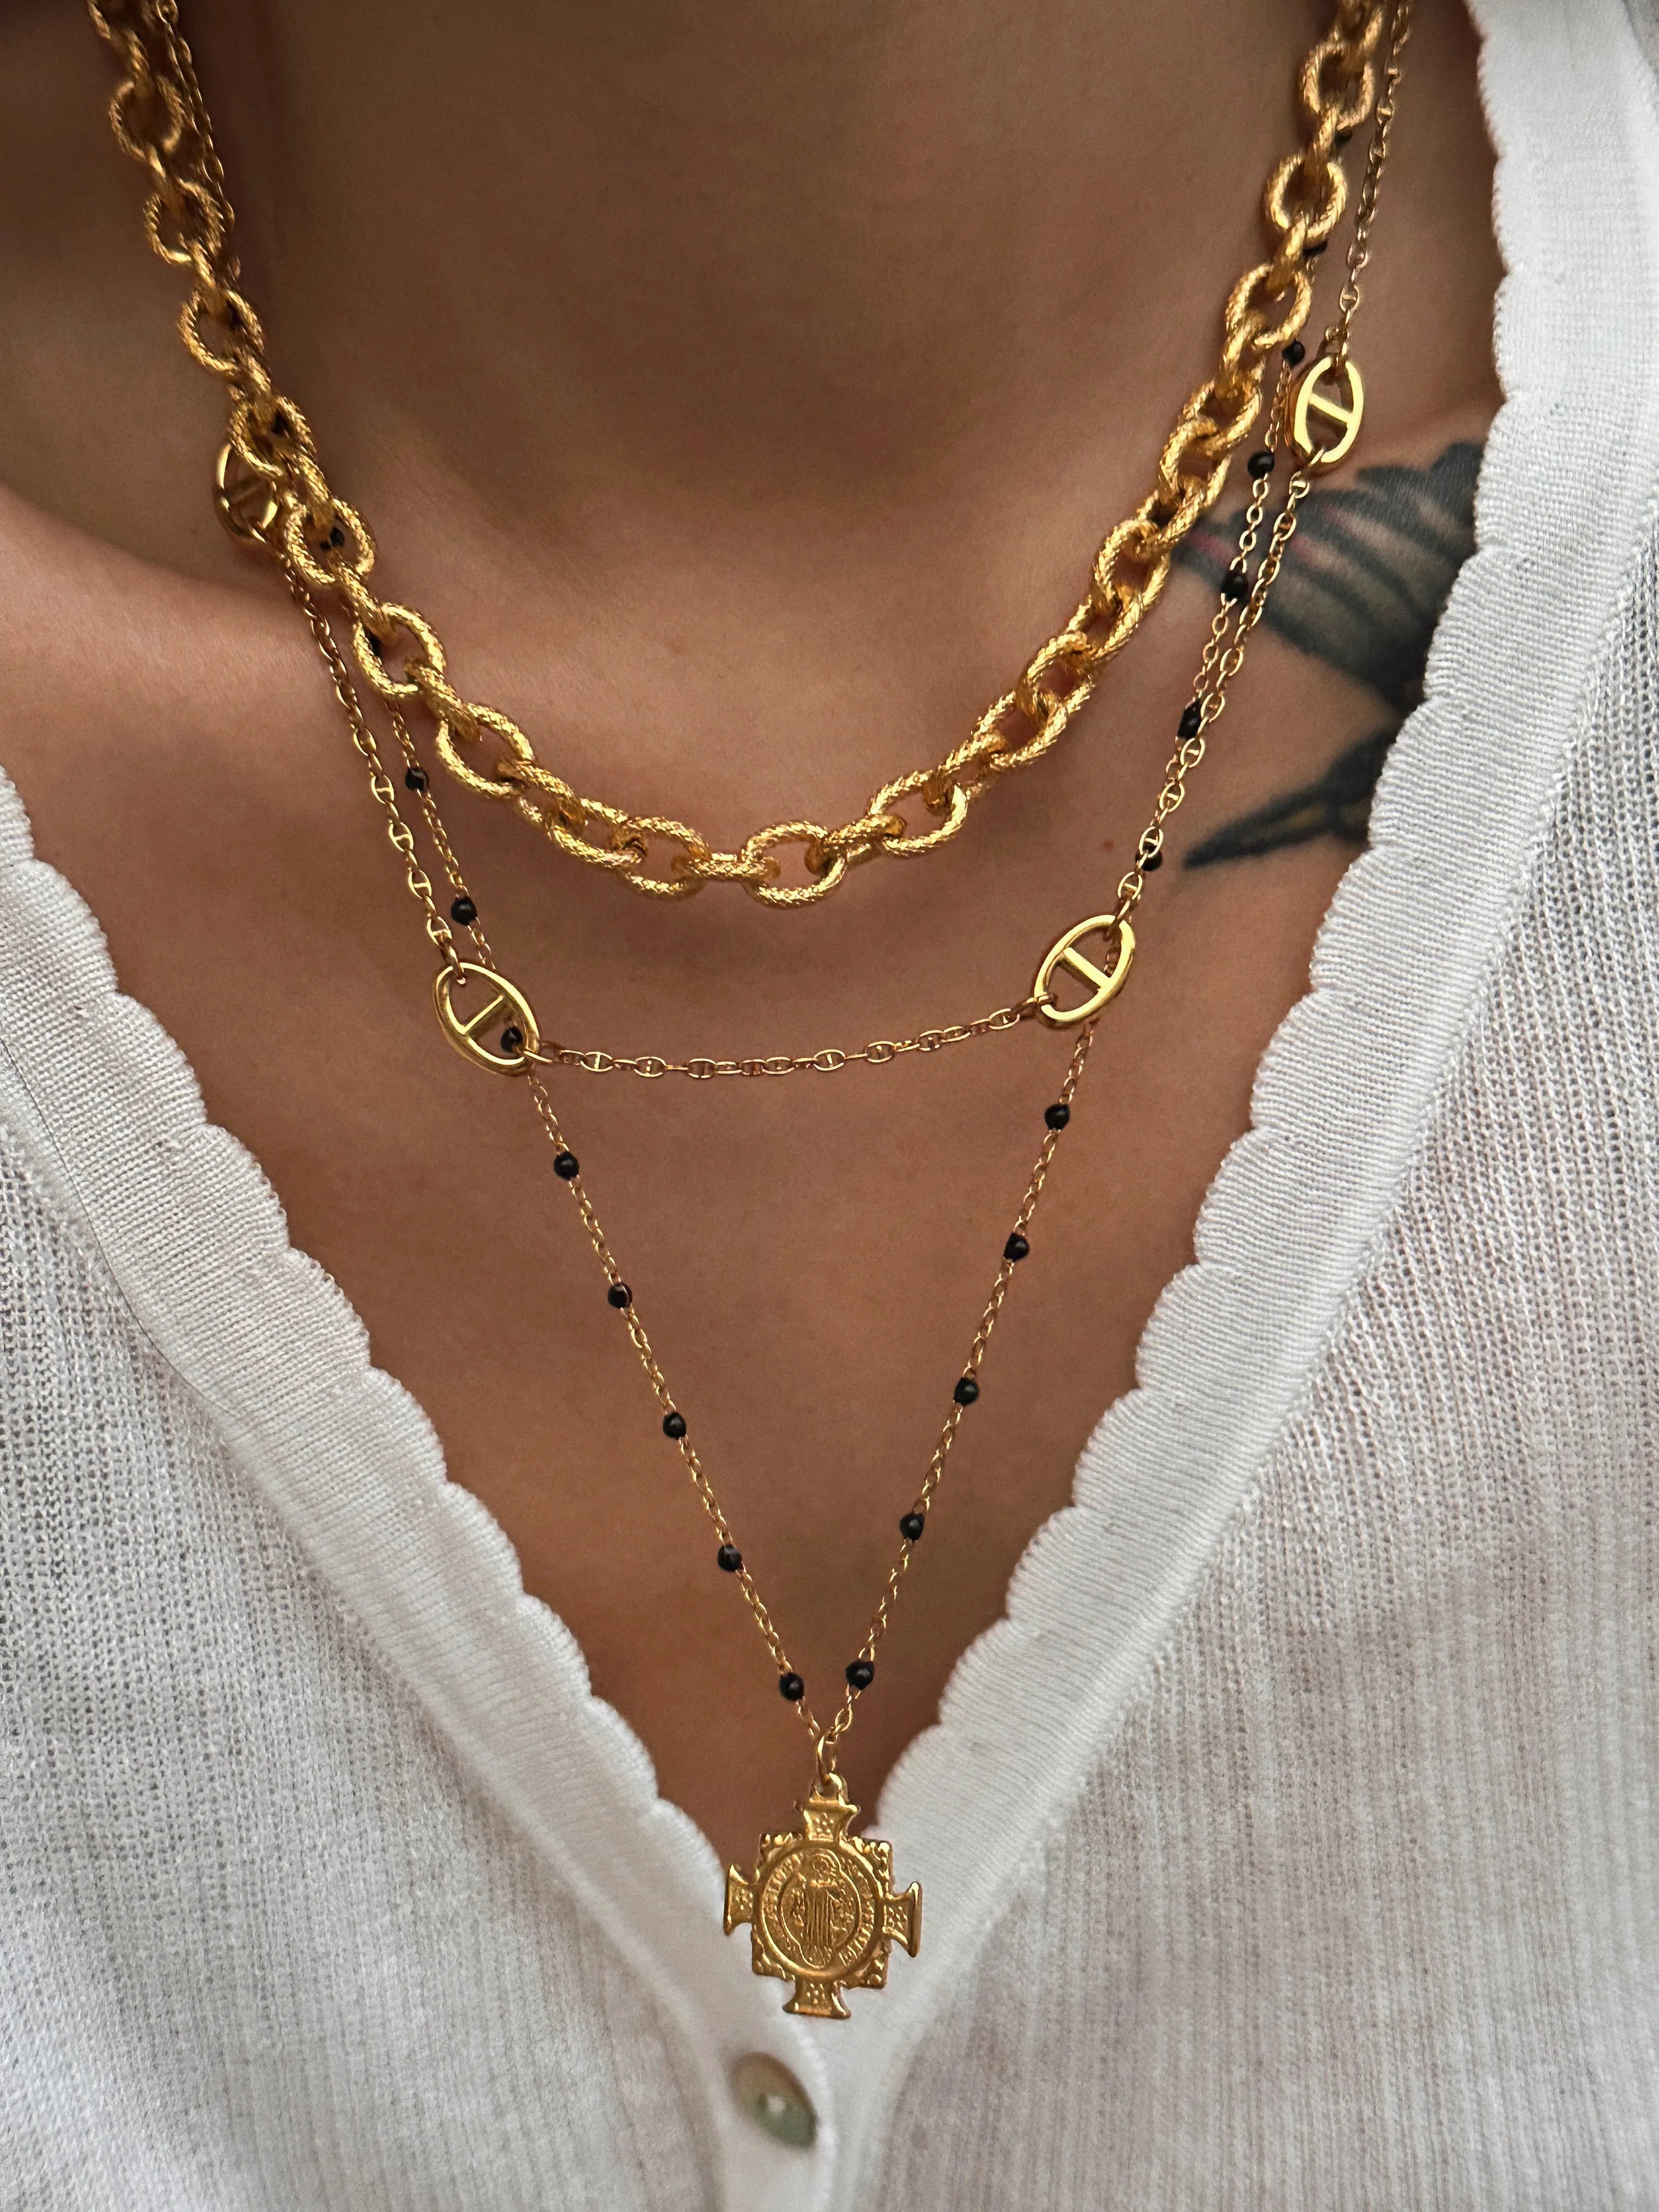 The “Layer Me”  Threaded Rope Necklace